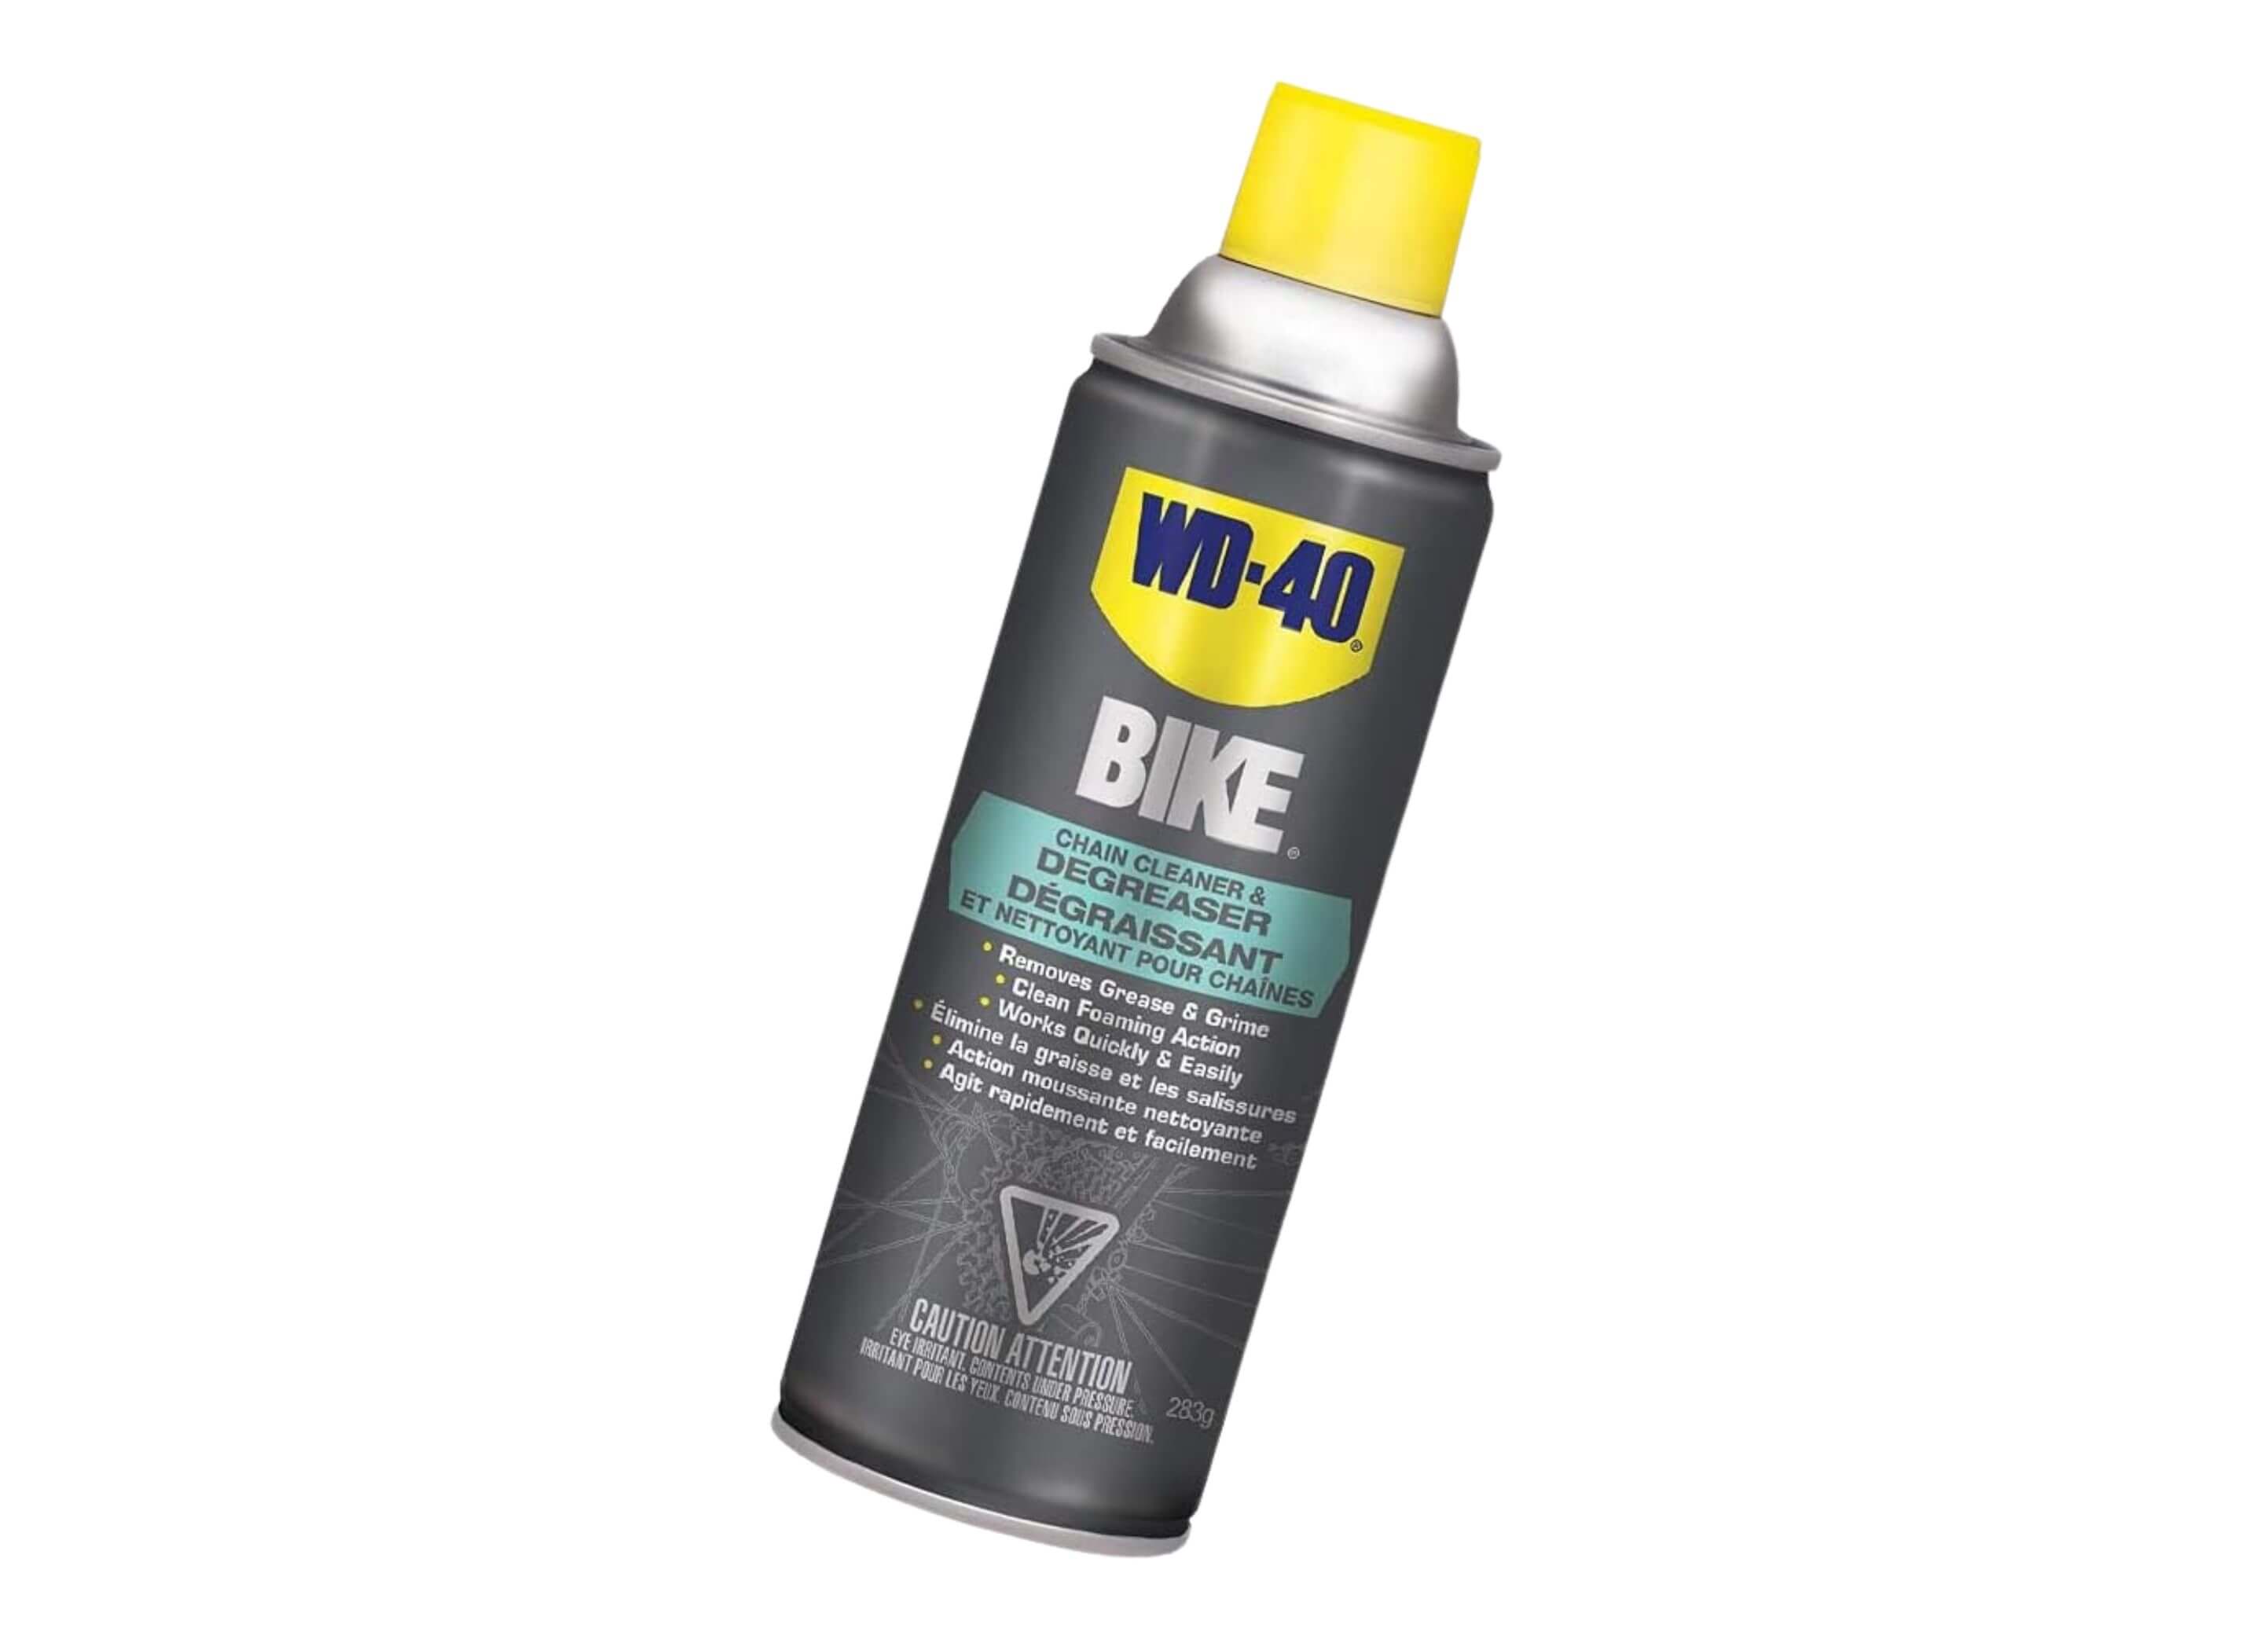 WD-40 Chain Cleaner & Degreaser